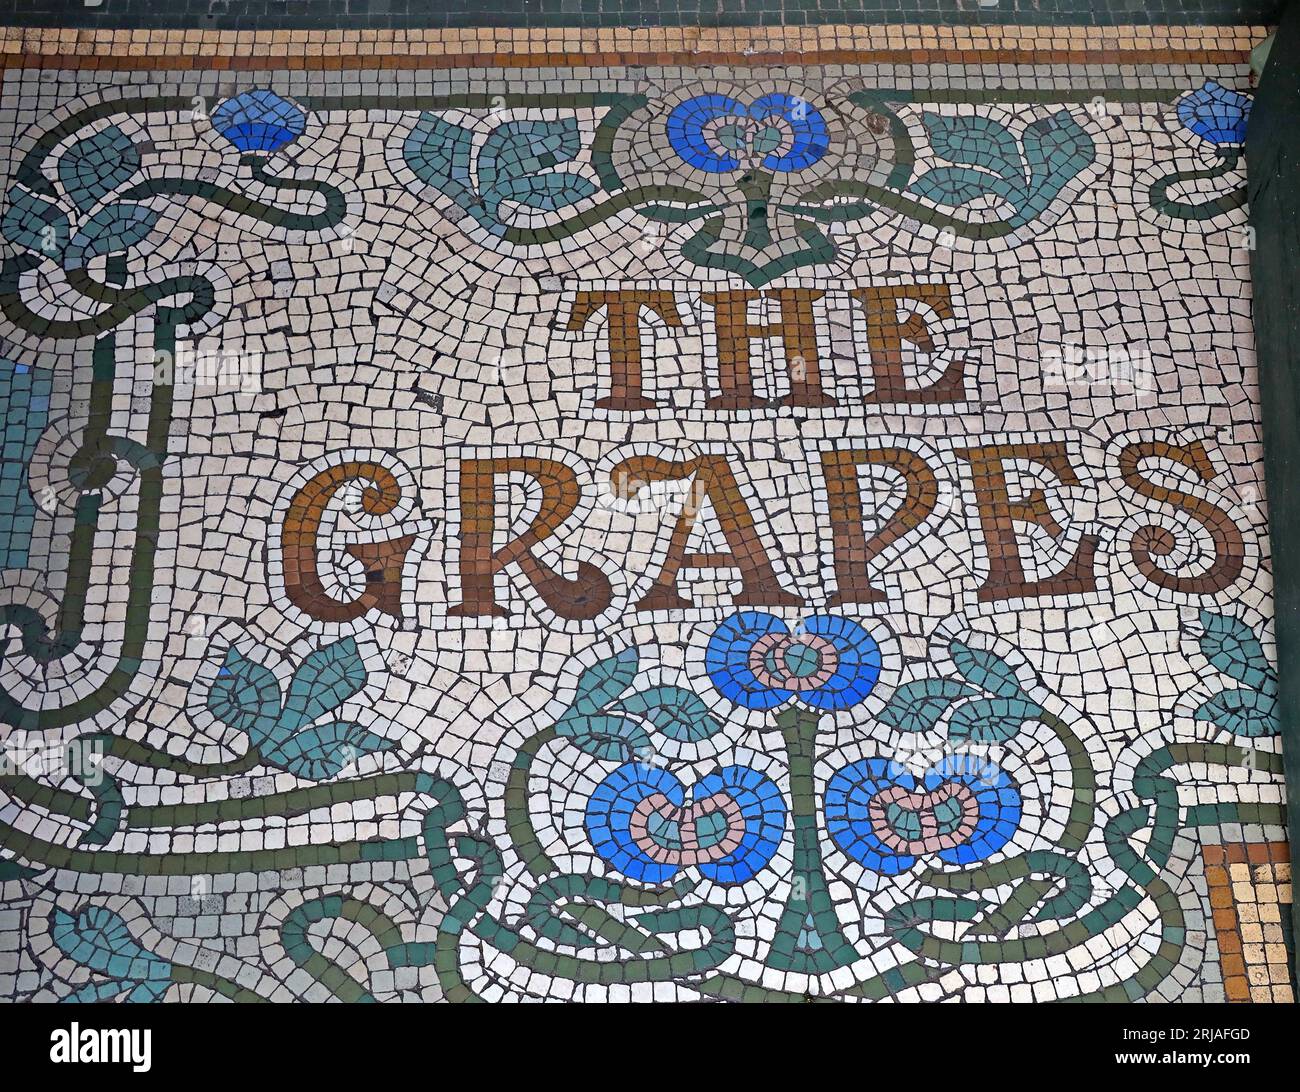 The Dispensary, previously the Grapes, 87 Renshaw St, Liverpool , Merseyside, England, UK, L1 2SP Stock Photo